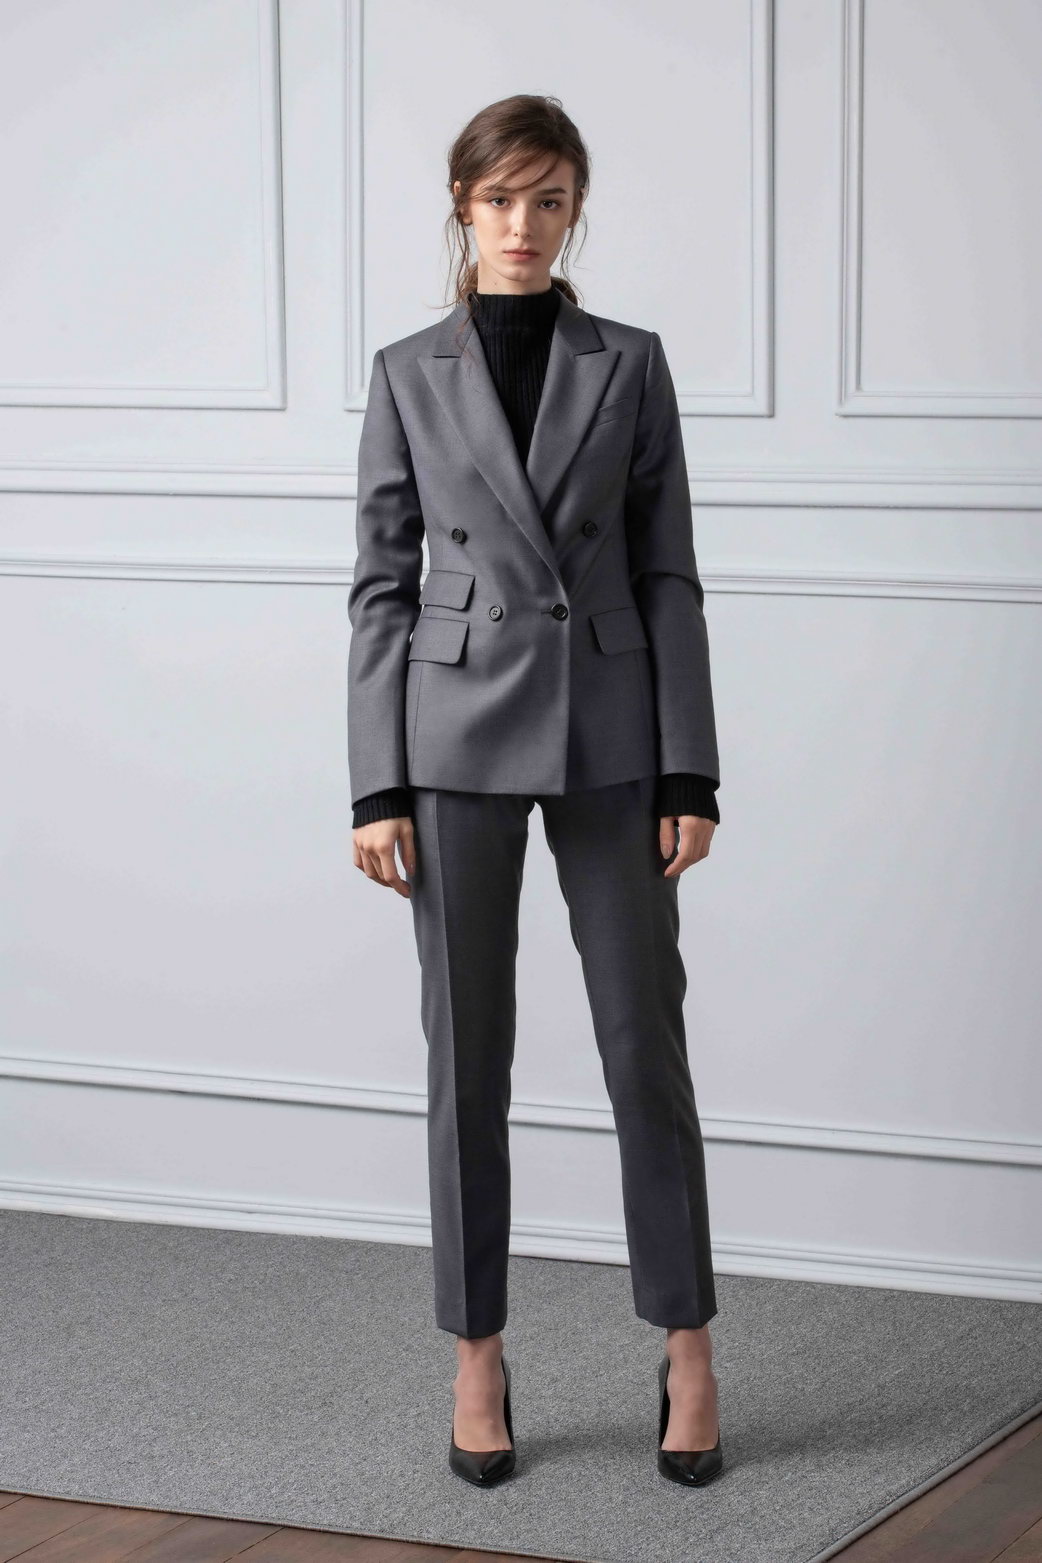 Women's Double-Breasted Pant Suit, 100% Wool Super 120s